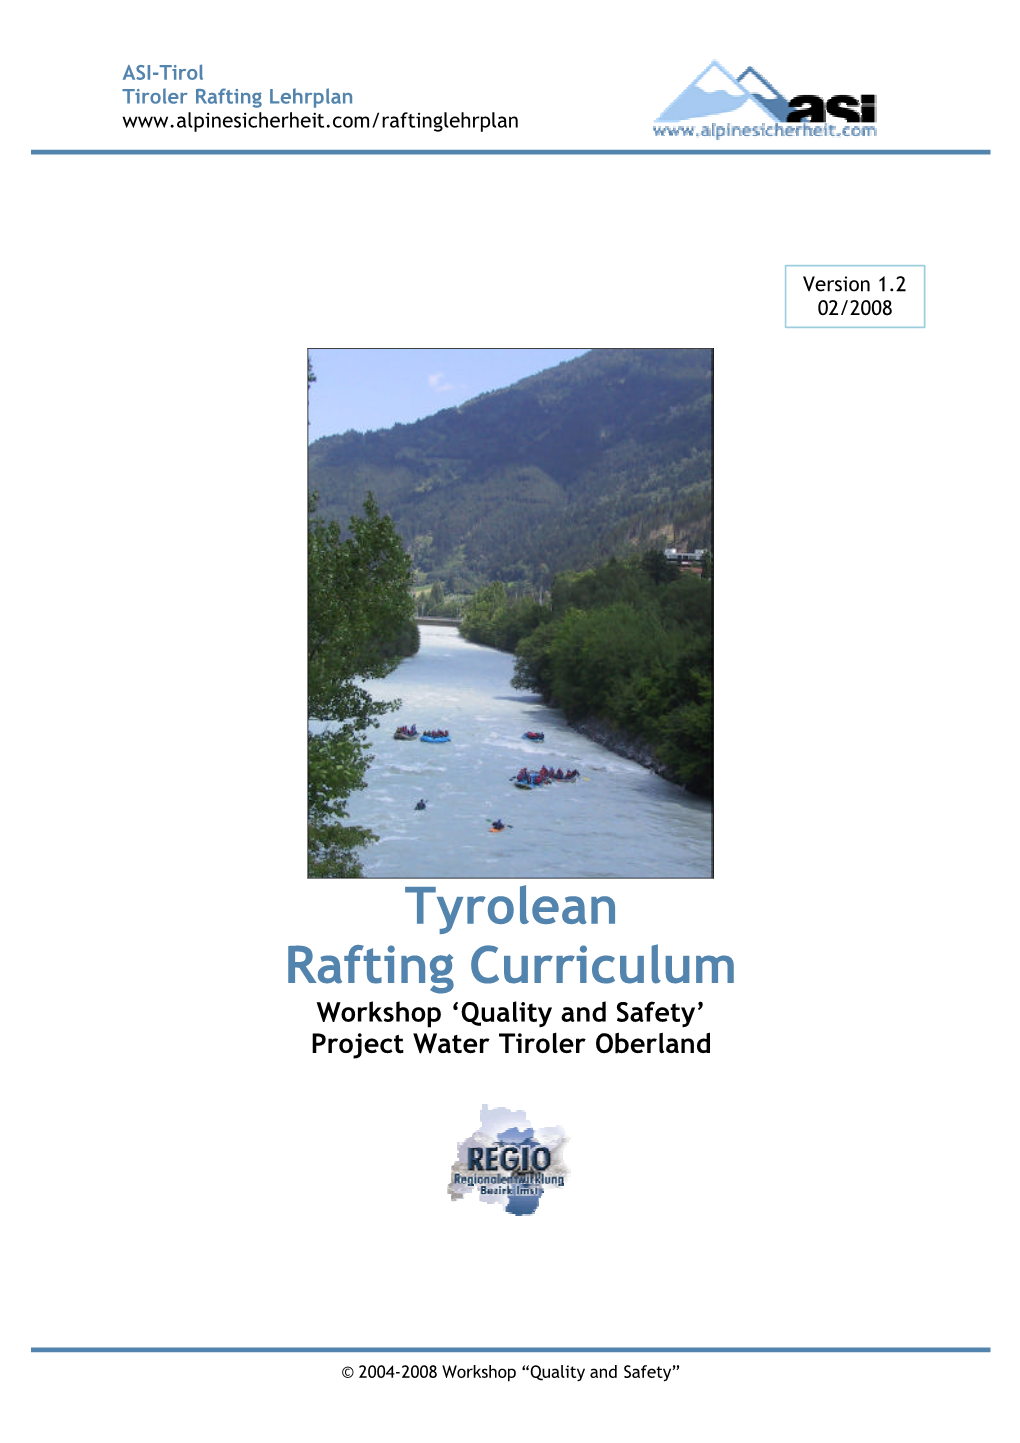 Tyrolean Rafting Curriculum Workshop ‘Quality and Safety’ Project Water Tiroler Oberland